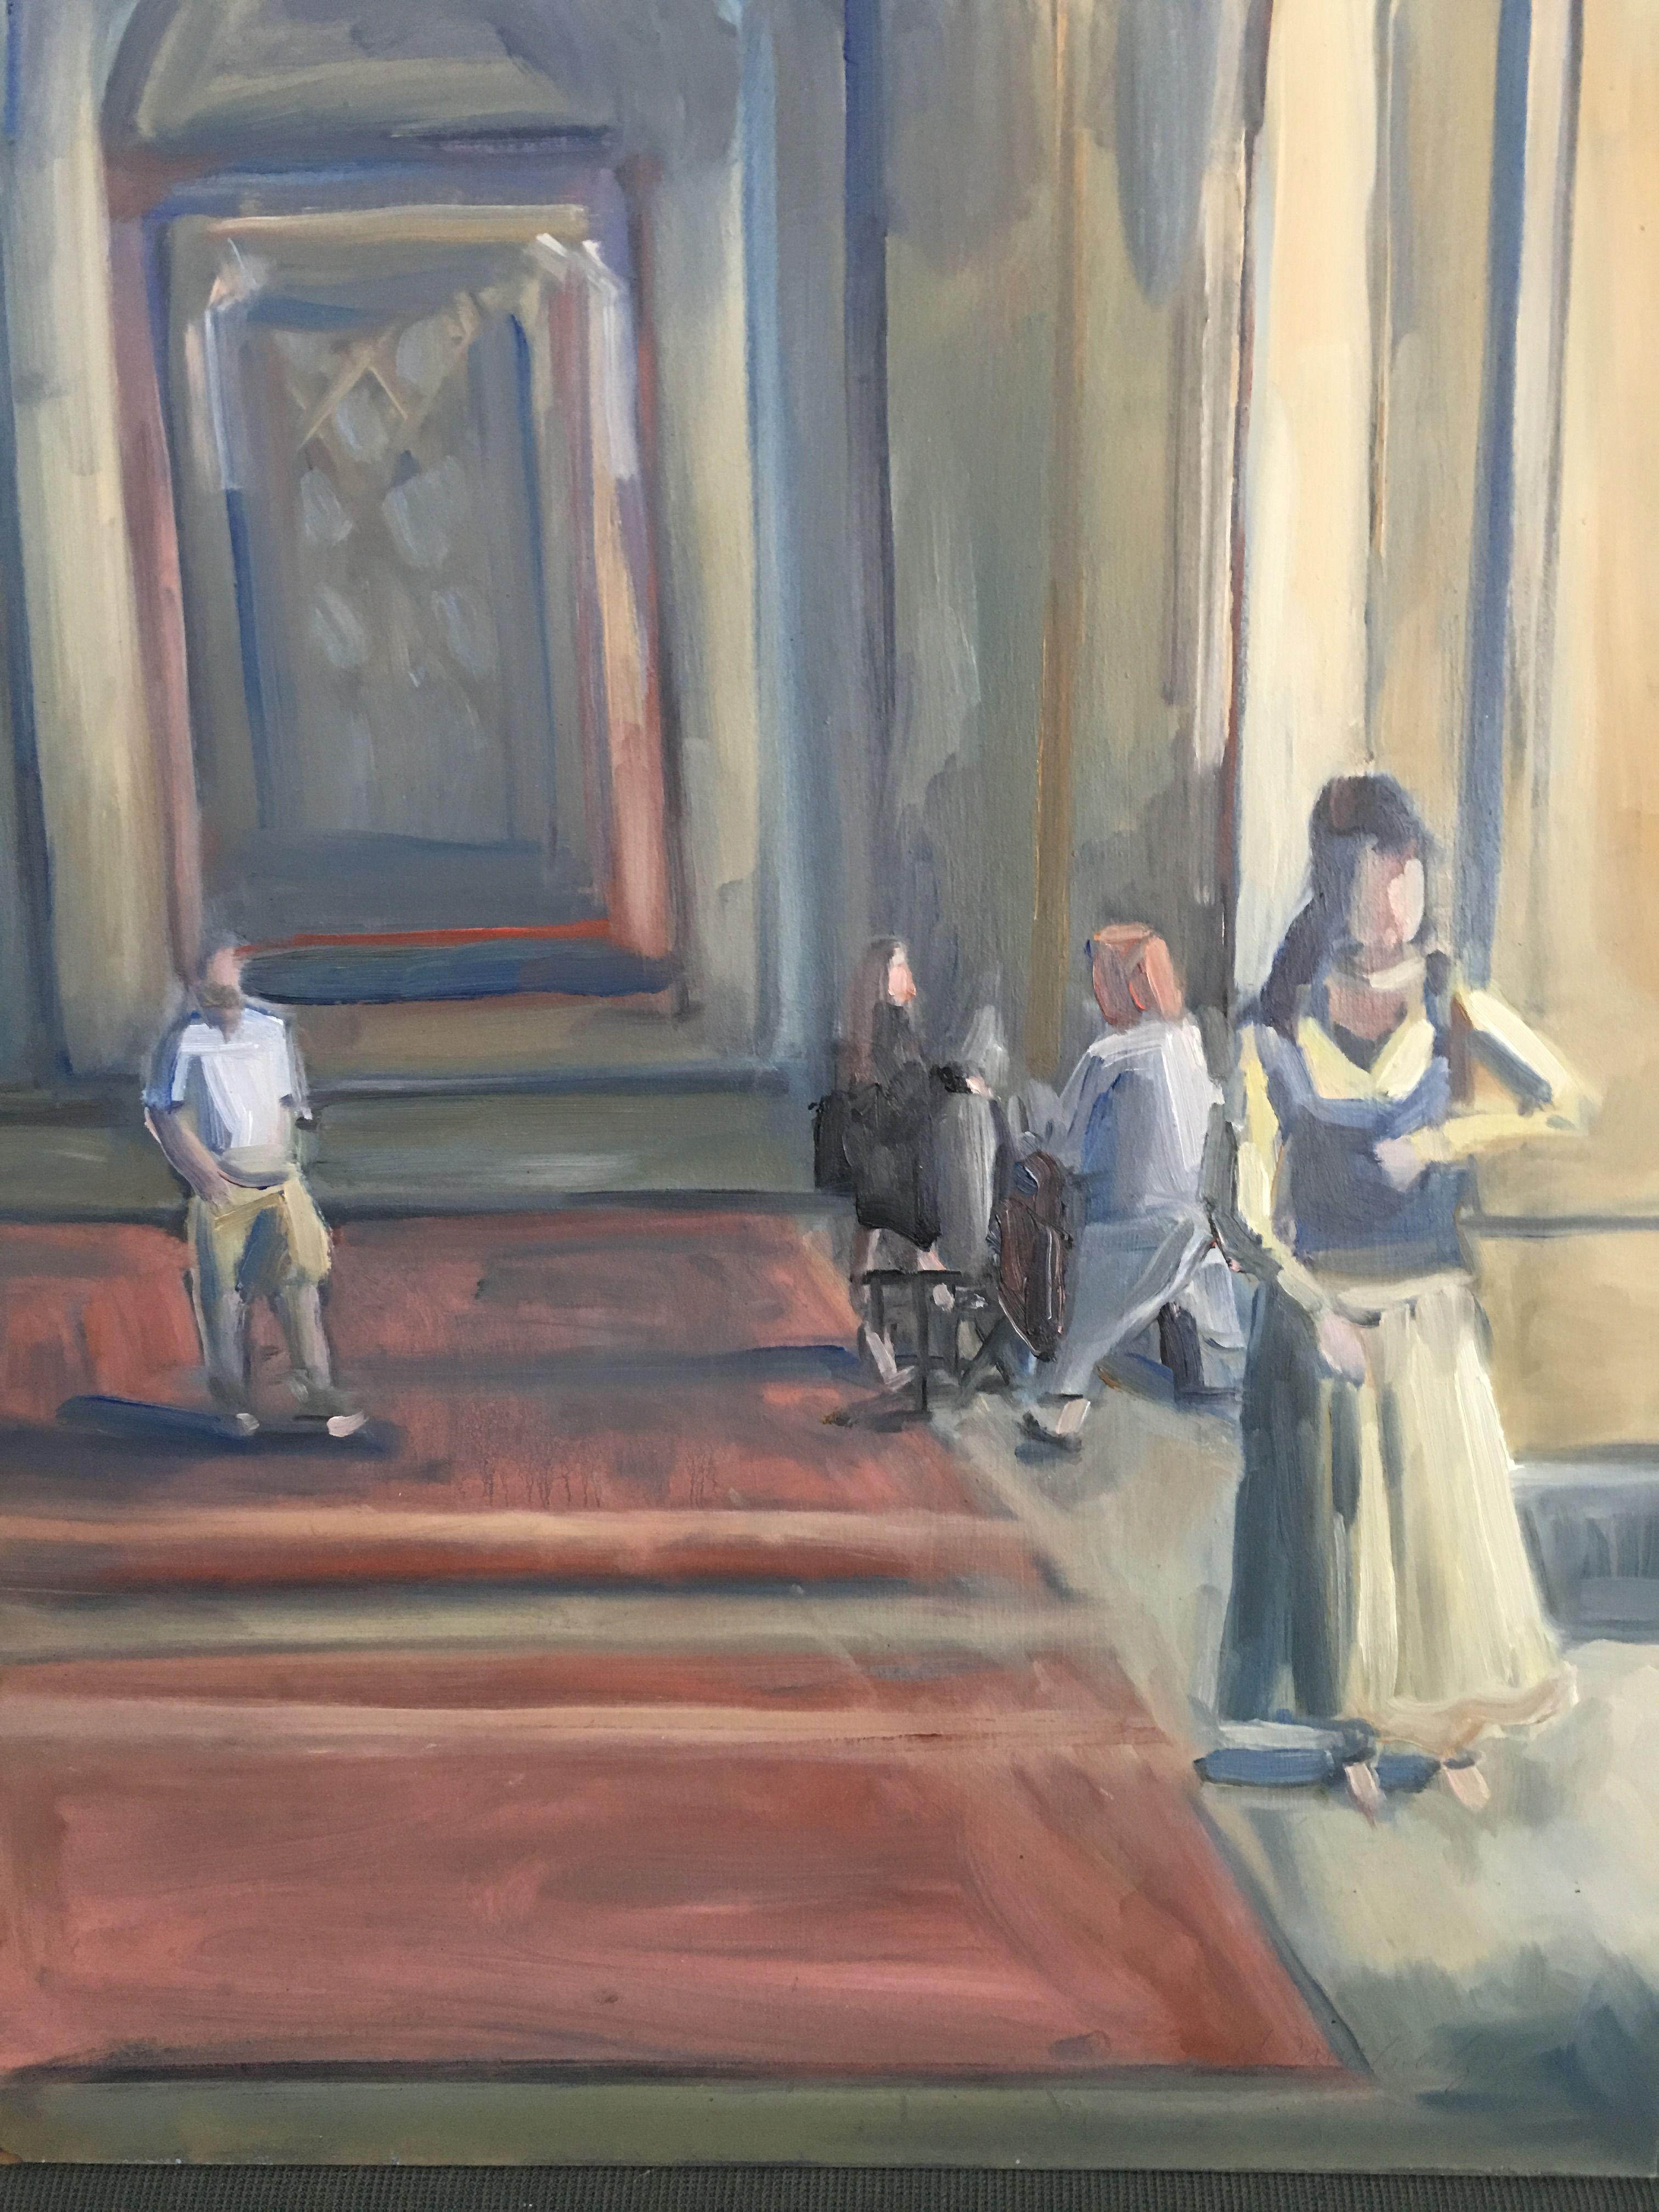 This scene takes blade near Bethesda Fountain Central Park New York City.  A dancer is seen in the foreground rehearsing her piece. :: Painting :: Realism :: This piece comes with an official certificate of authenticity signed by the artist :: Ready